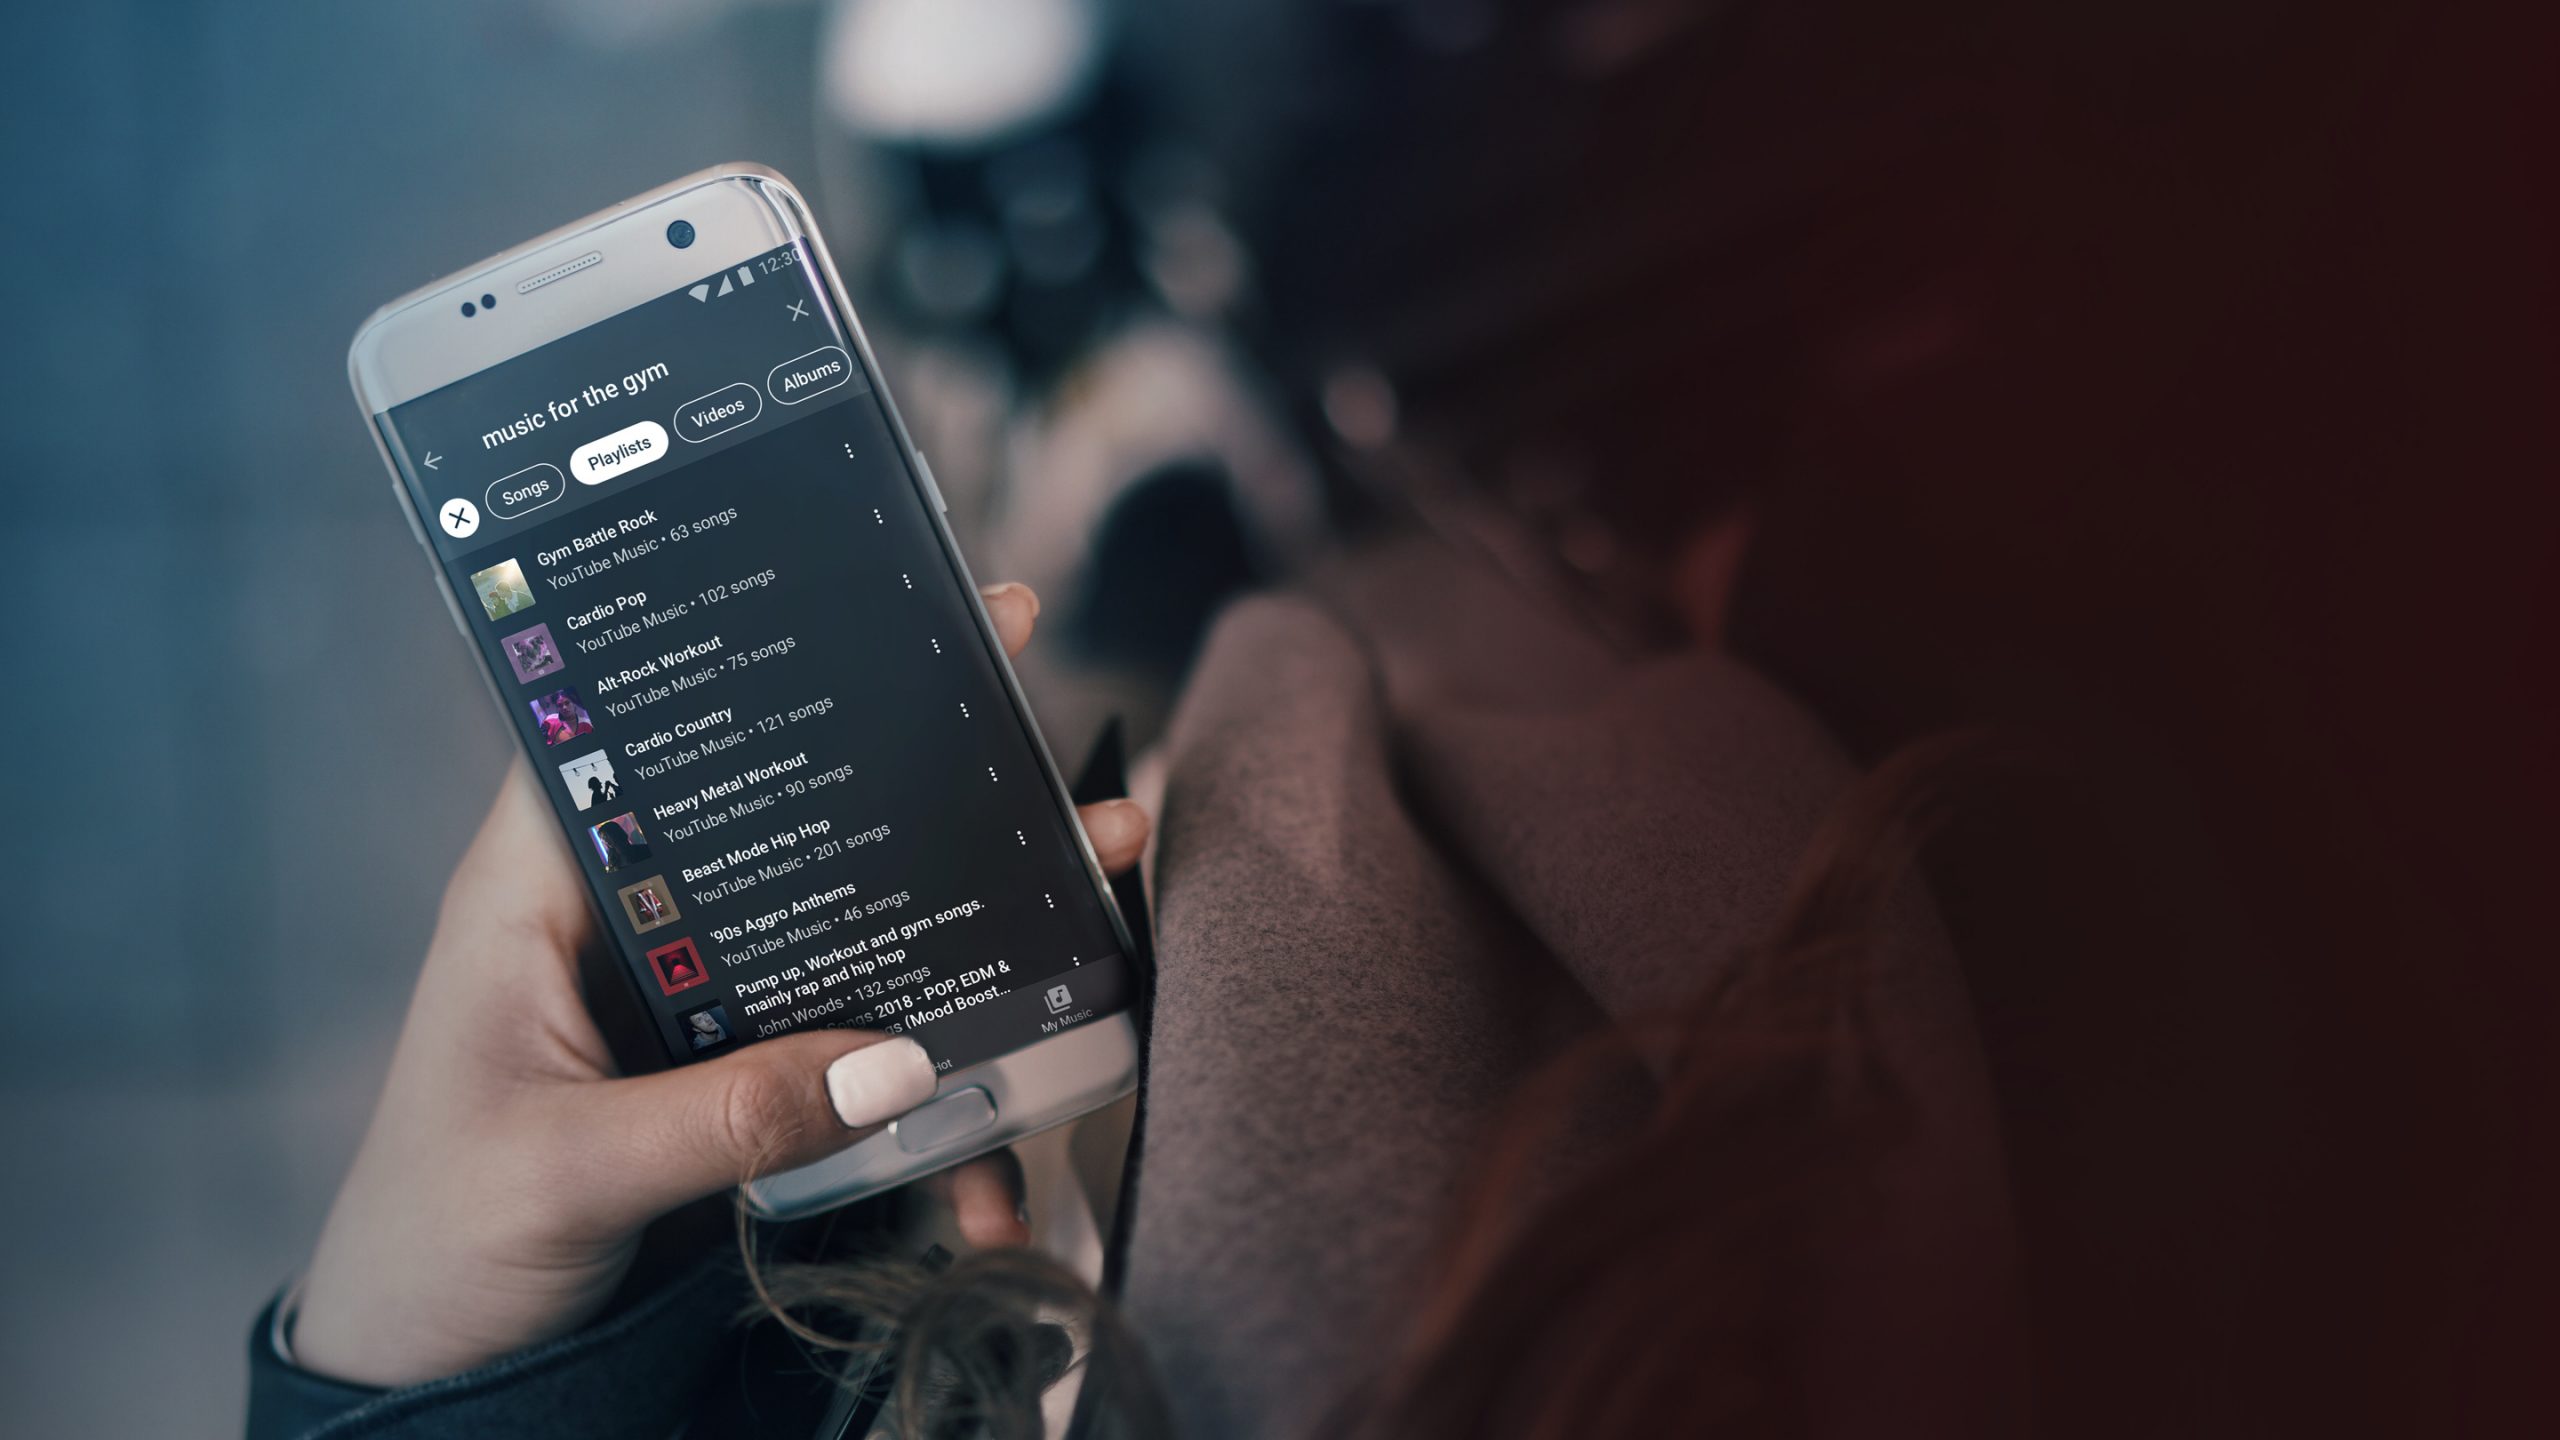 YouTube Music currently has more songs available for streaming than Spotify and Apple Music